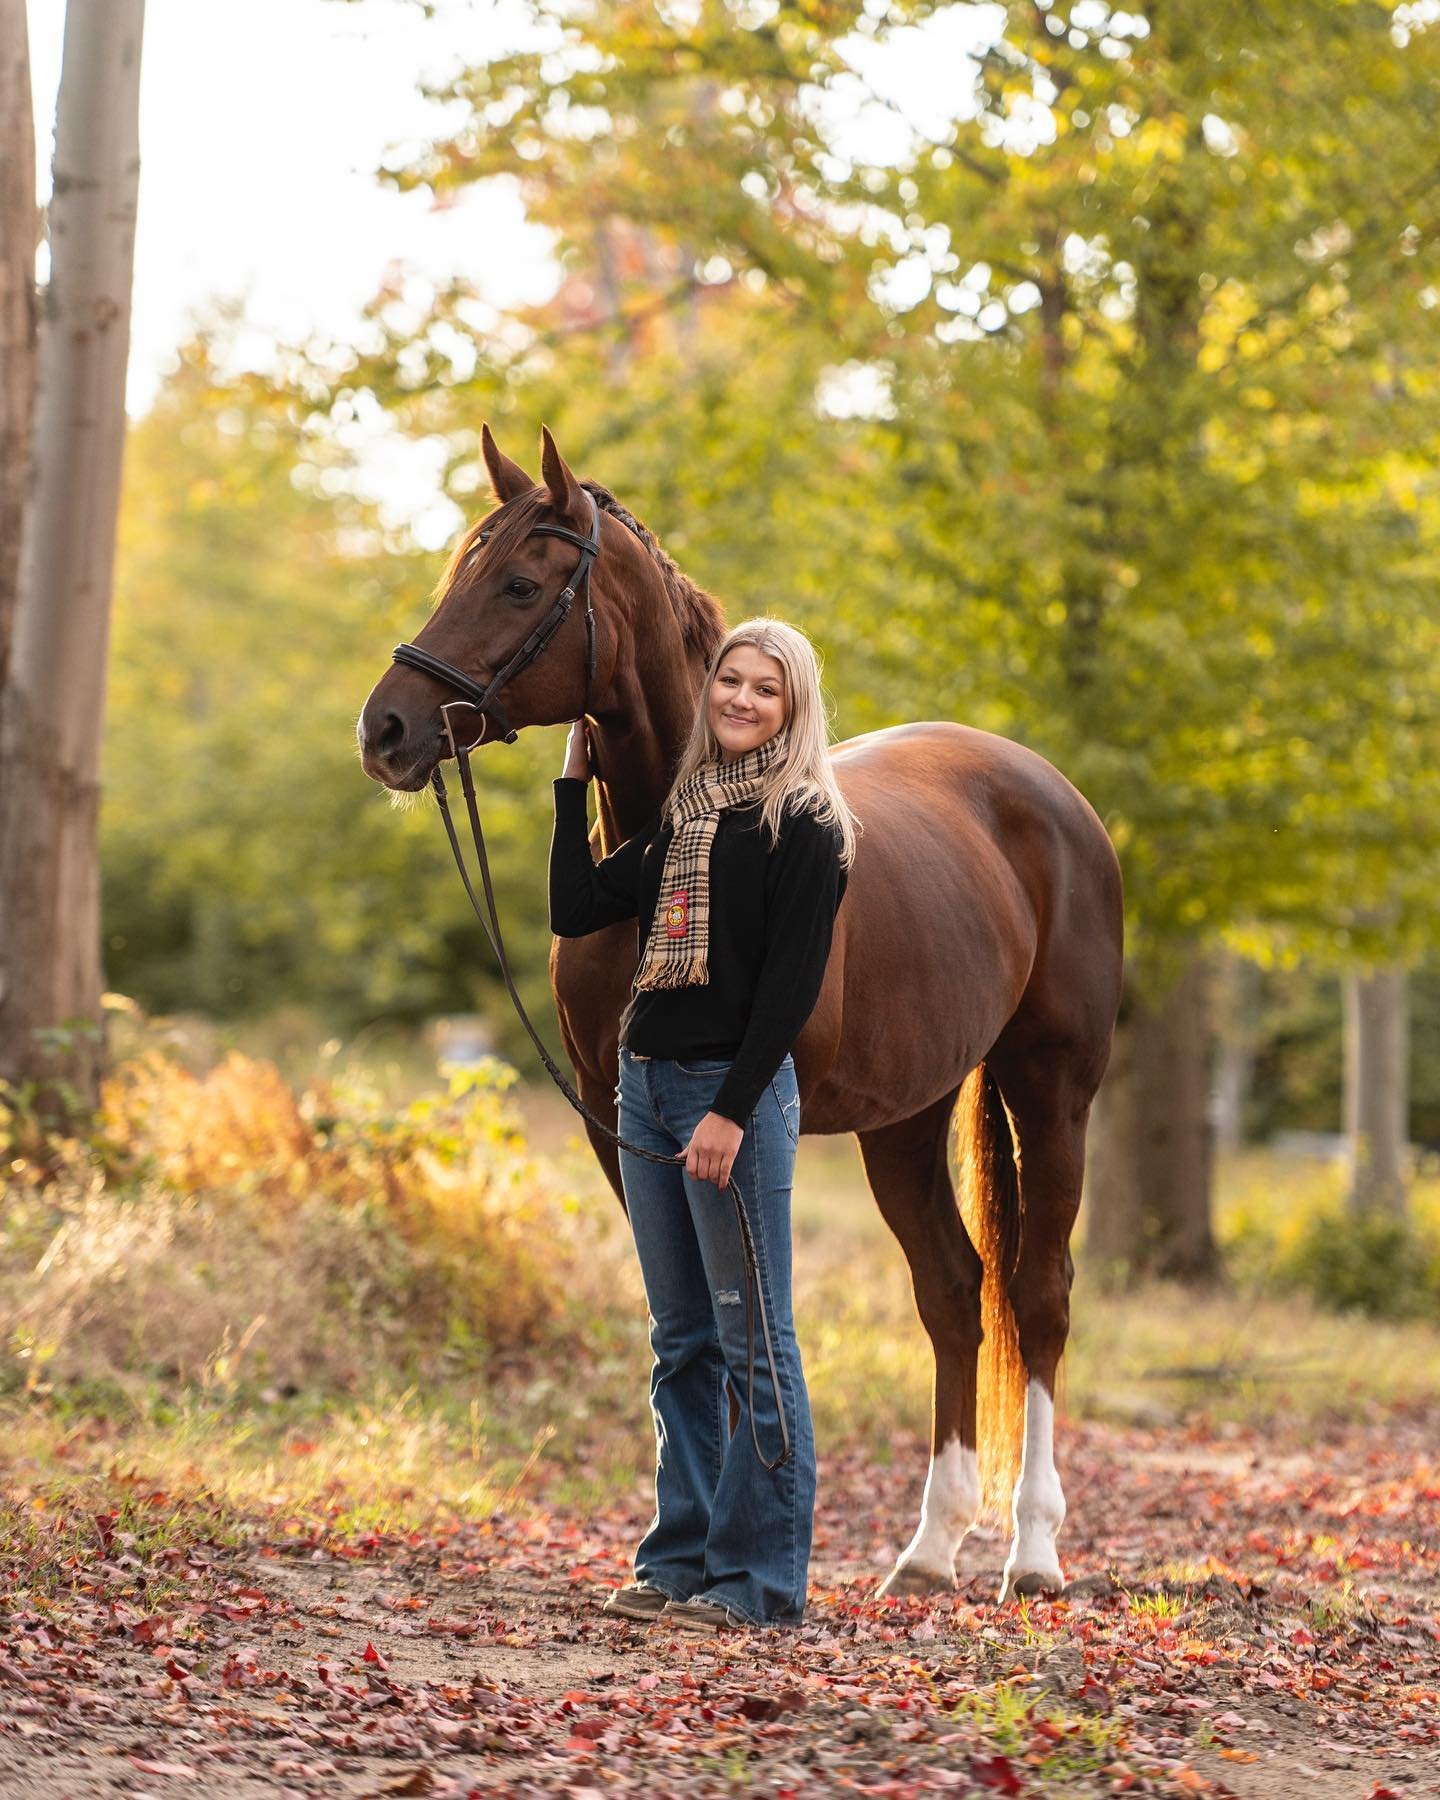 Peyton &amp; Kinsley ✨🍂
.
We had the most gorgeous fall weather for this session!! 
.
.
#equinephotography #horsephotographer #equestrianphotographer #equestrianlife #upstateny #autumninnewyork